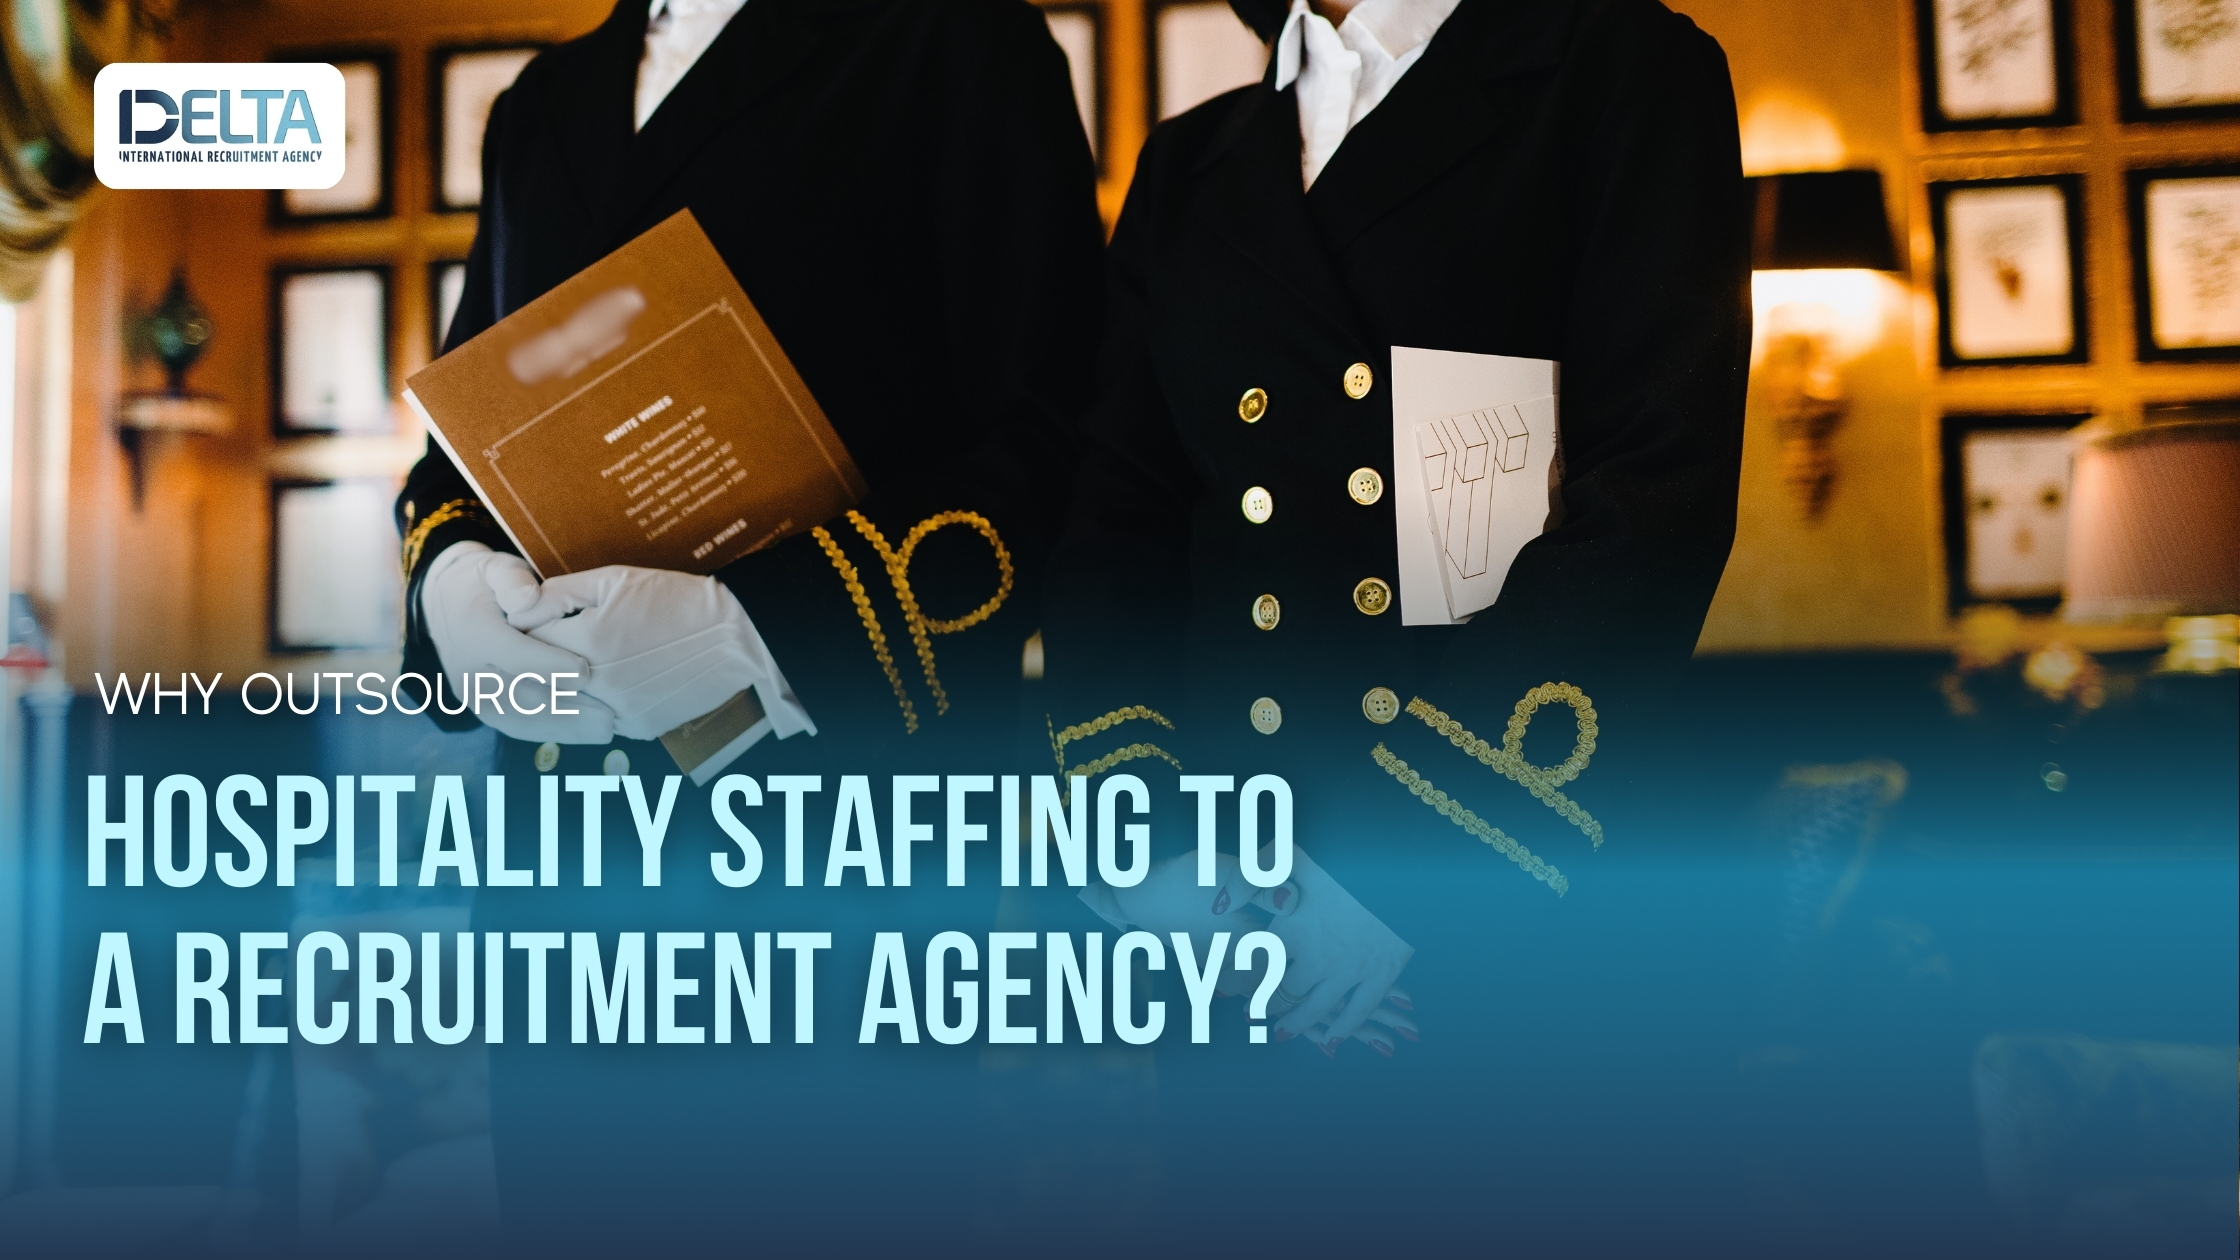 Why Outsource Hospitality Staffing to a Recruitment Agency?